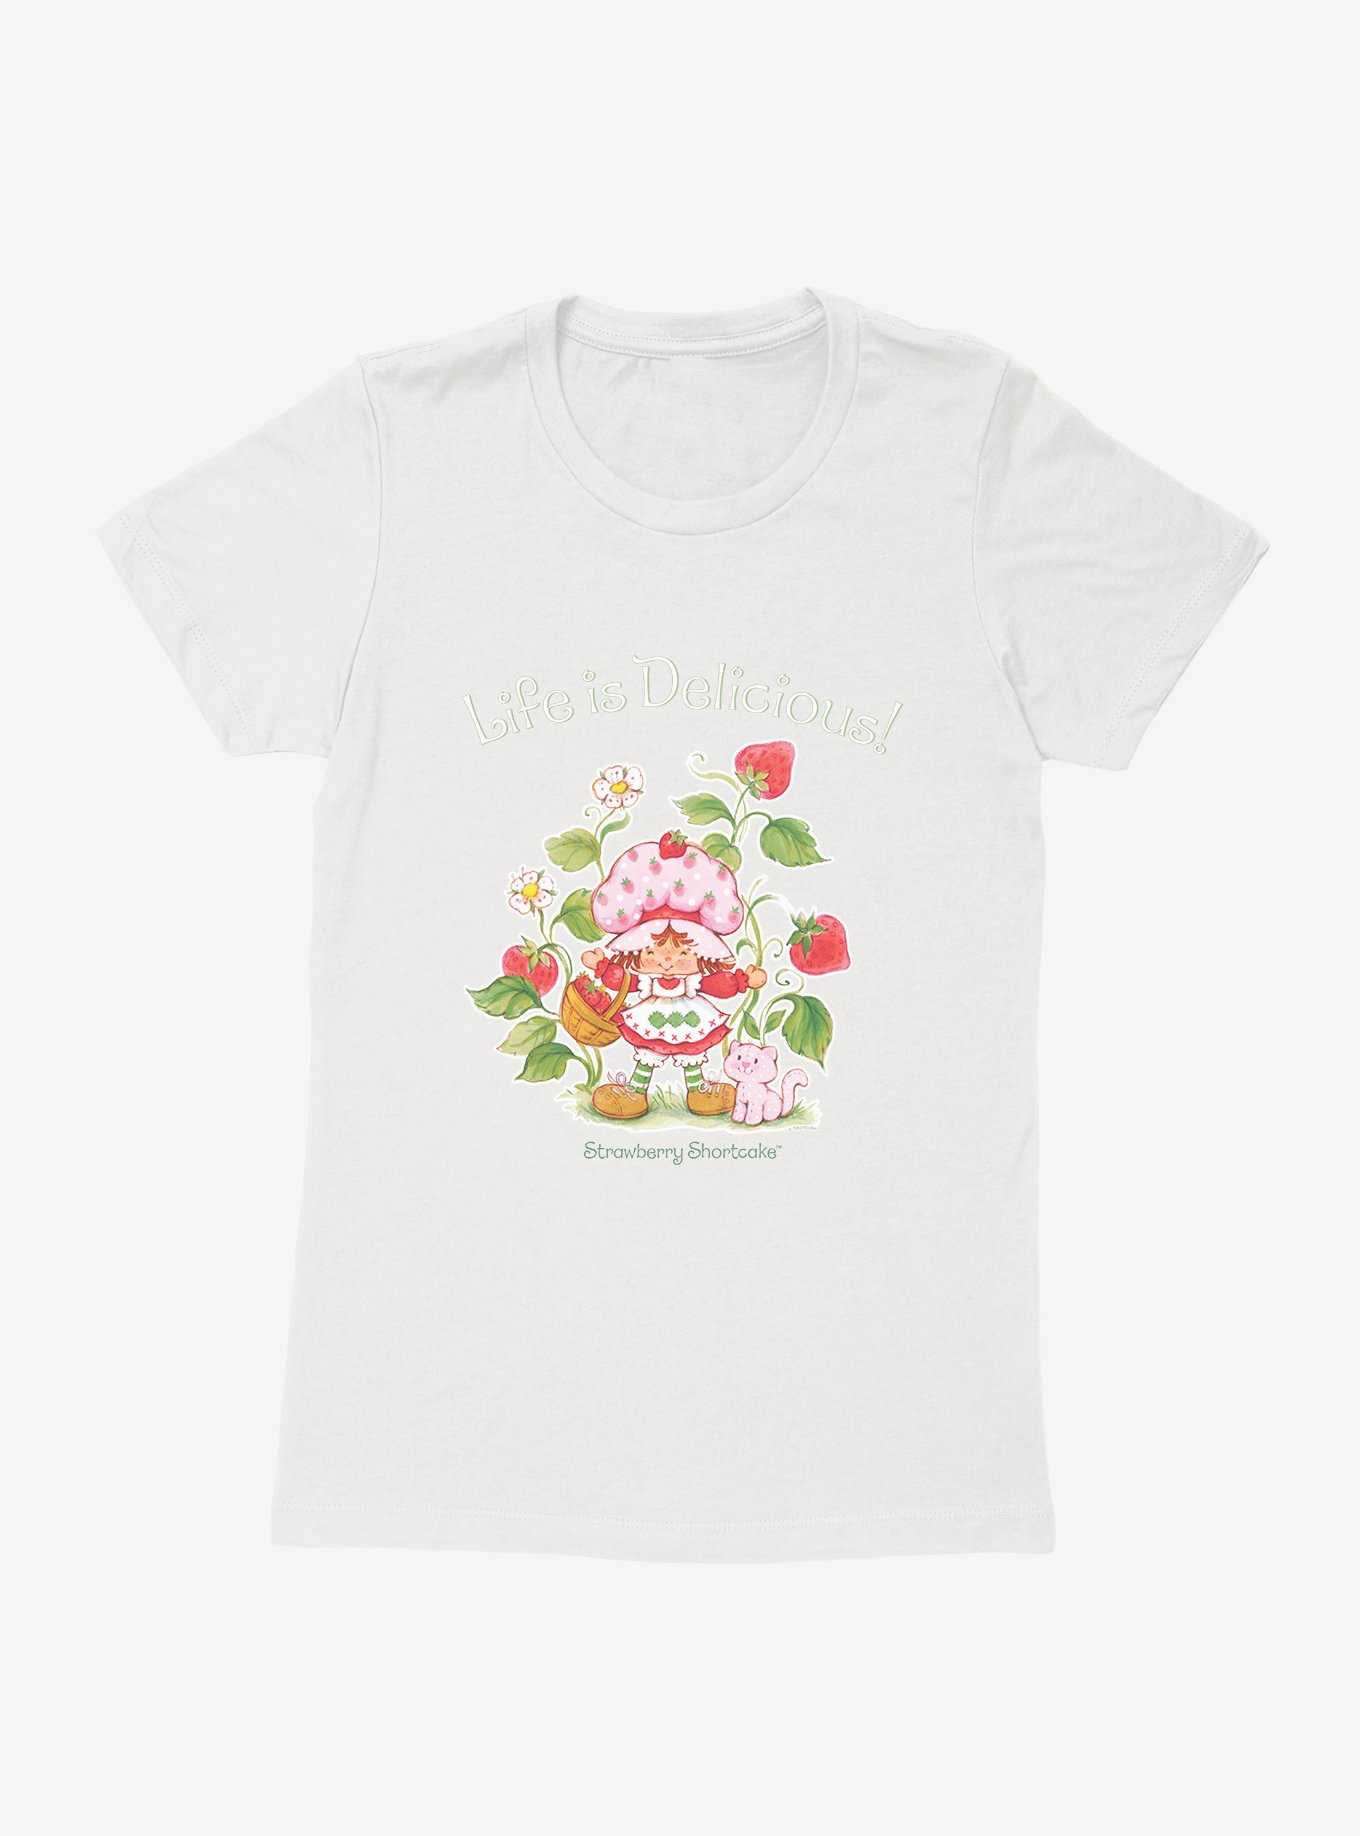 Strawberry Shortcake Life Is Delicious! Womens T-Shirt, , hi-res